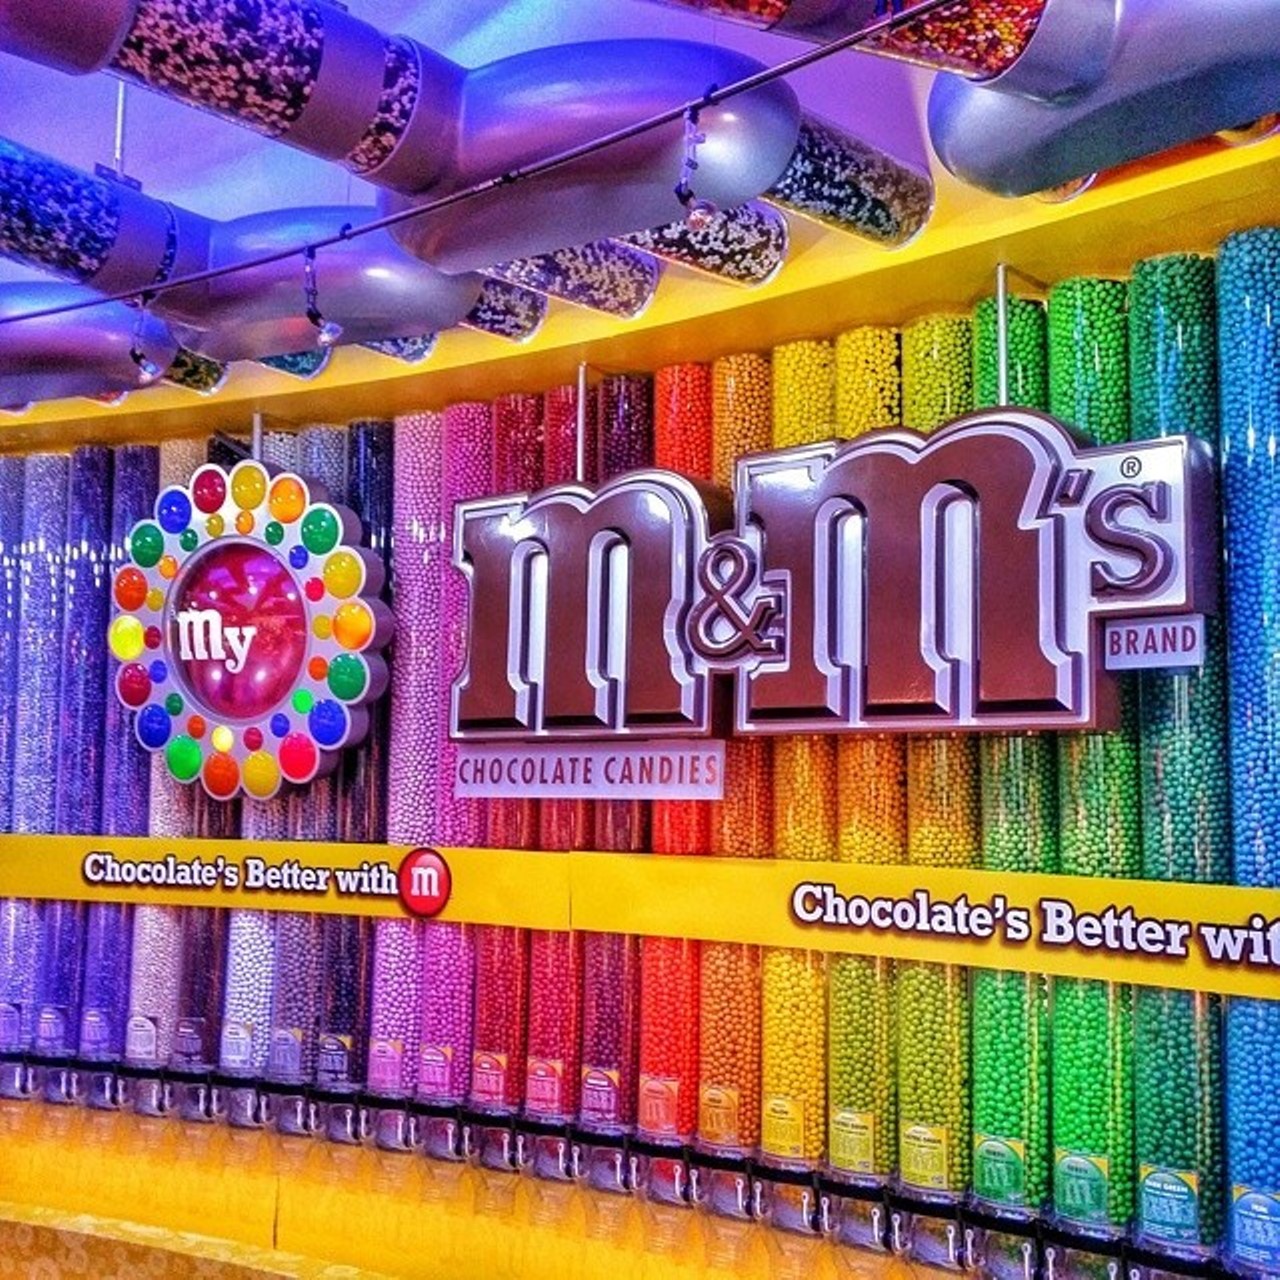 M&M's World at Florida Mall
Also at the Florida Mall, this free meet-and-greet is one of the few places where you can meet life size (really over life-size) M&M characters. The M&M World is a fun shop to explore with some interactive exhibits but this small meet-&-greet is what makes this retail experience a must see if you&#146;re at the mall.  
Photo via arkiteckt_ on Instagram. 